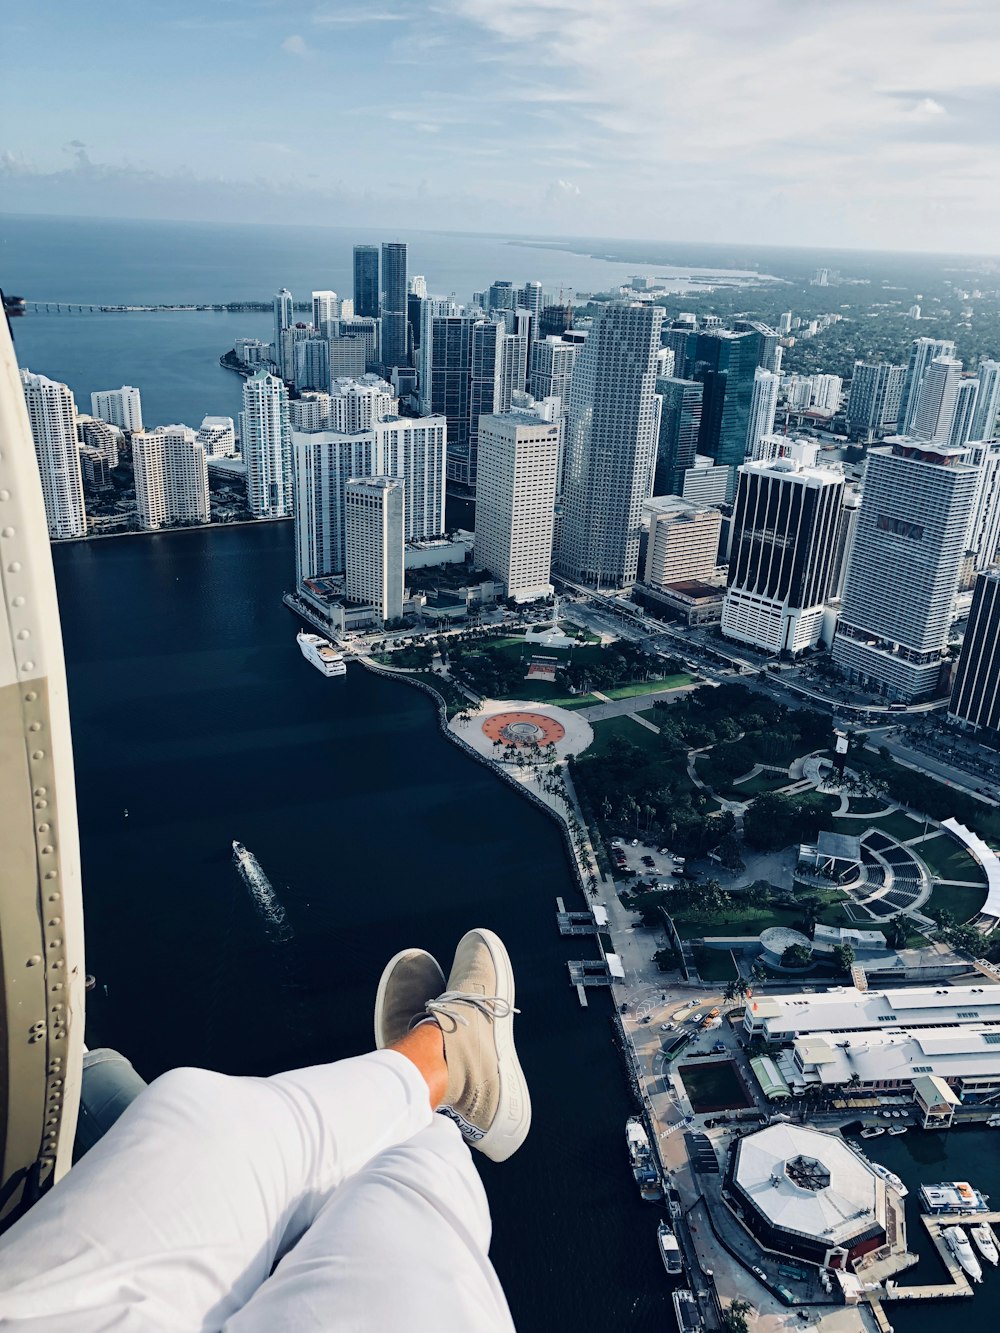 person in white pants sitting on ledge overlooking city